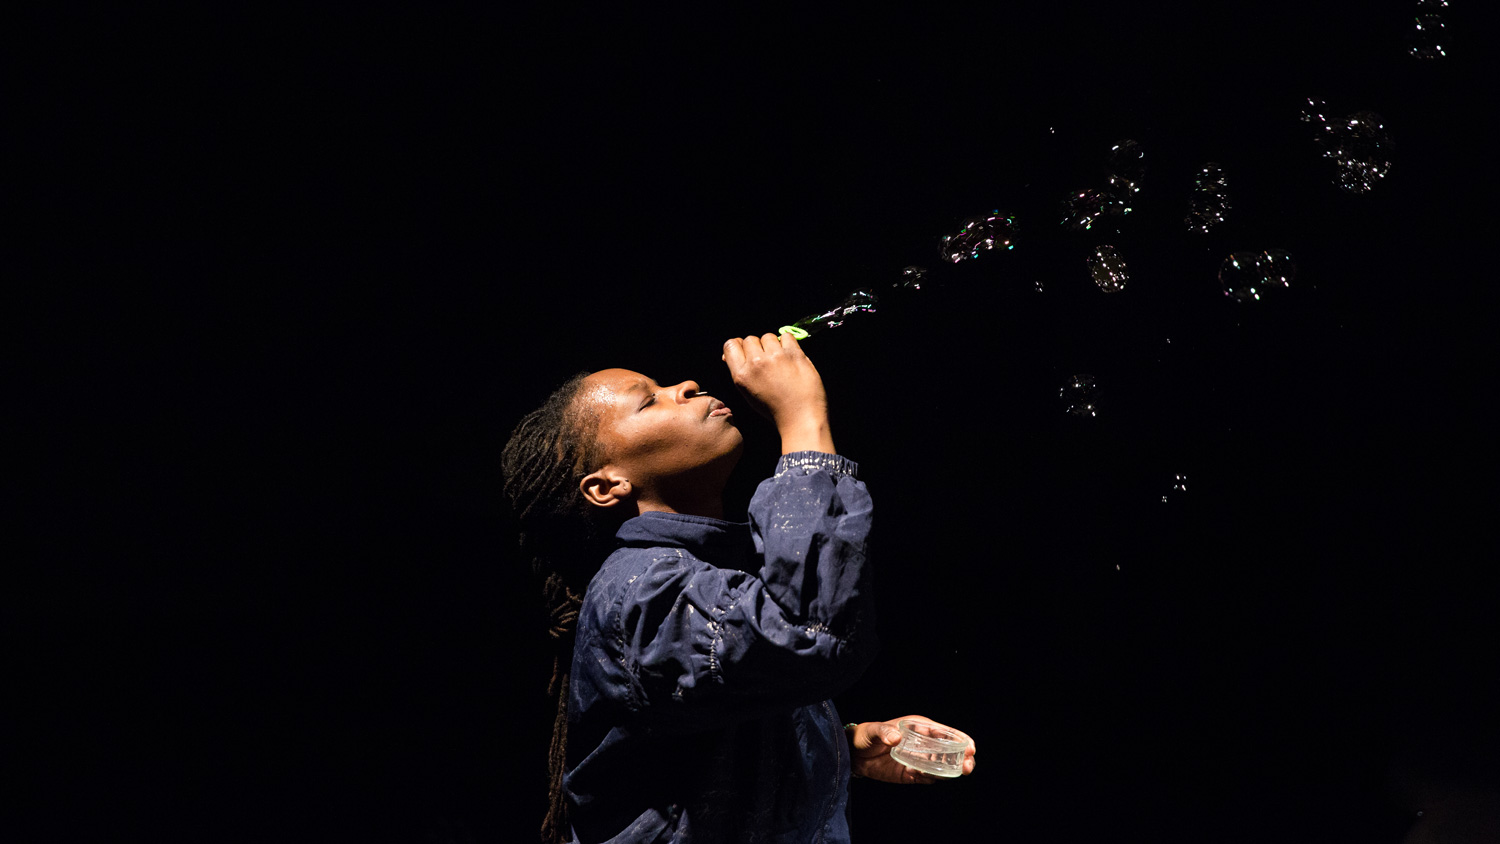 A Black person with long braided hair and wearing a blue shirt blows bubbles up into a dark room. 